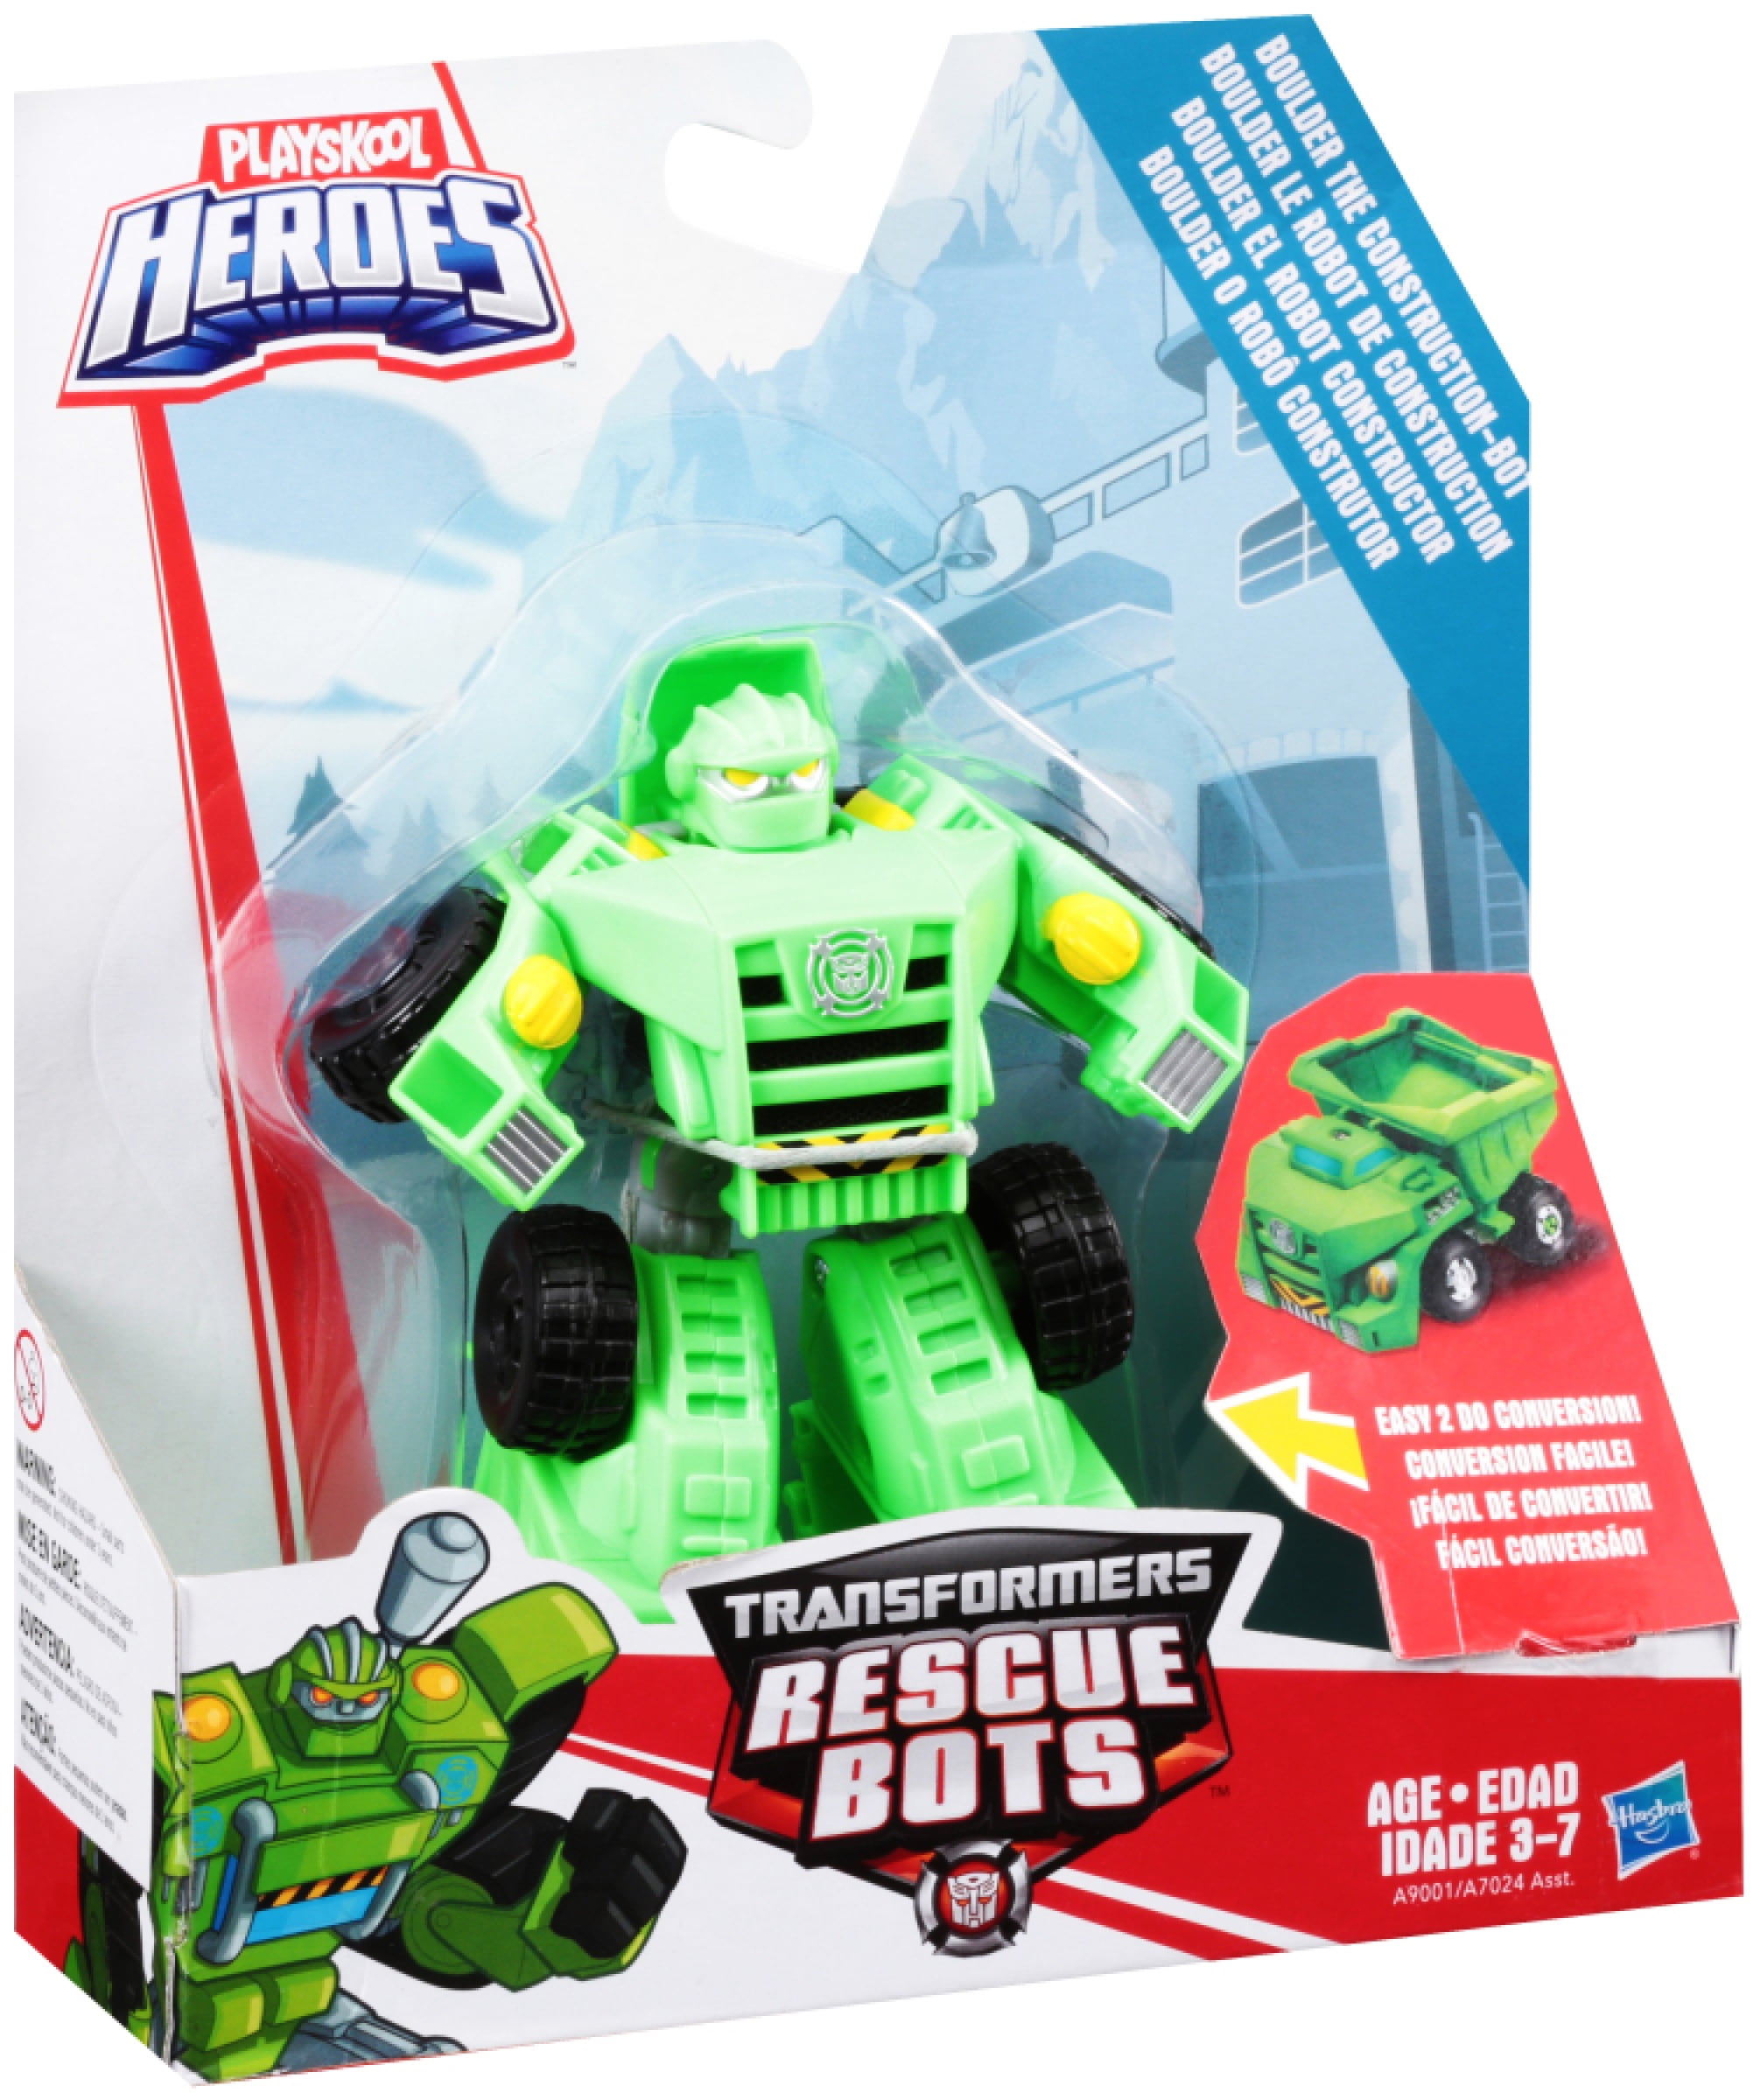 Details about   Playskool Heroes Transformers Rescue Bots Rescan Boulder Construction Bot Act... 